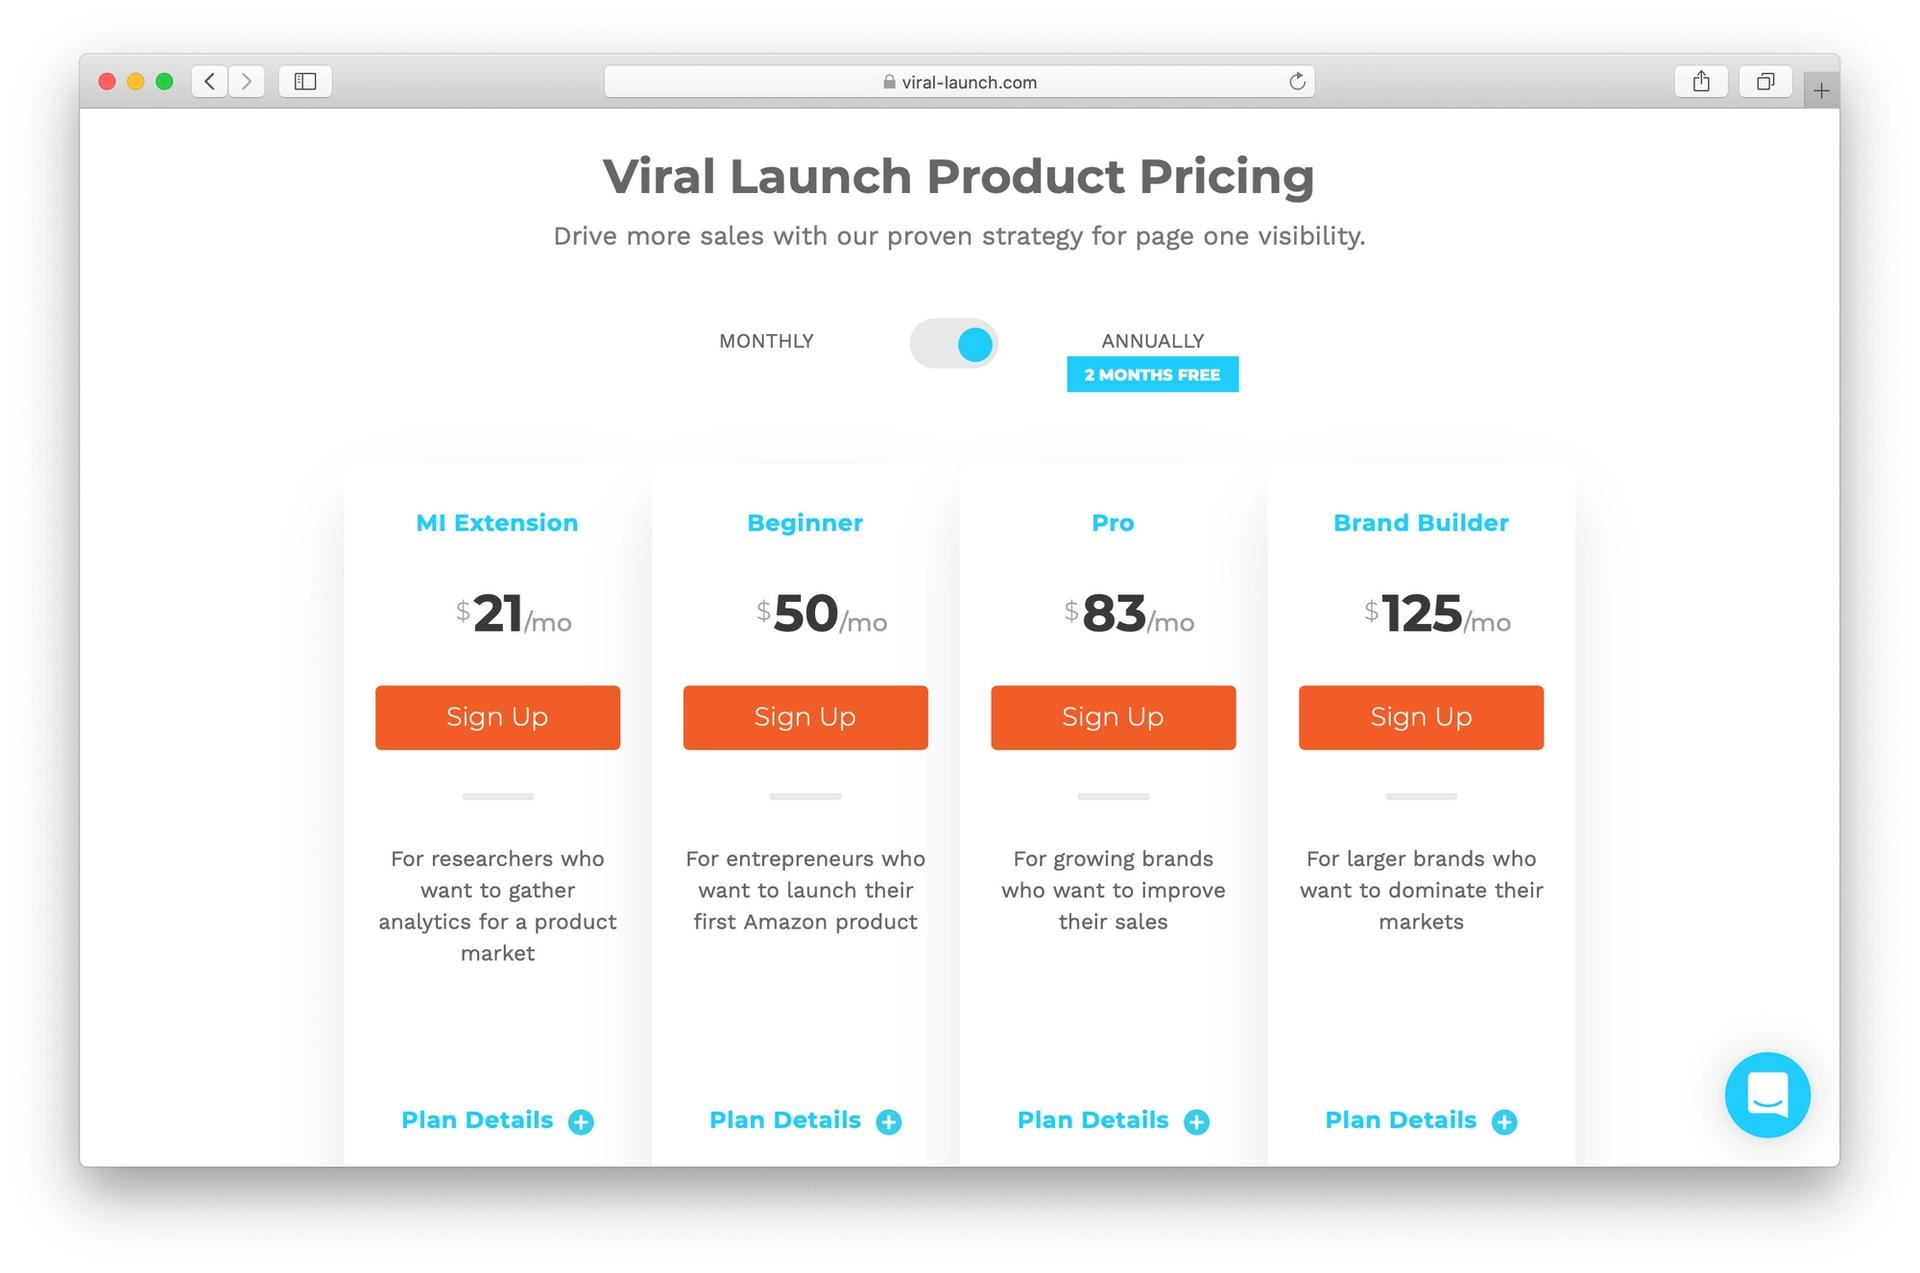 Viral Launch pricing 2021